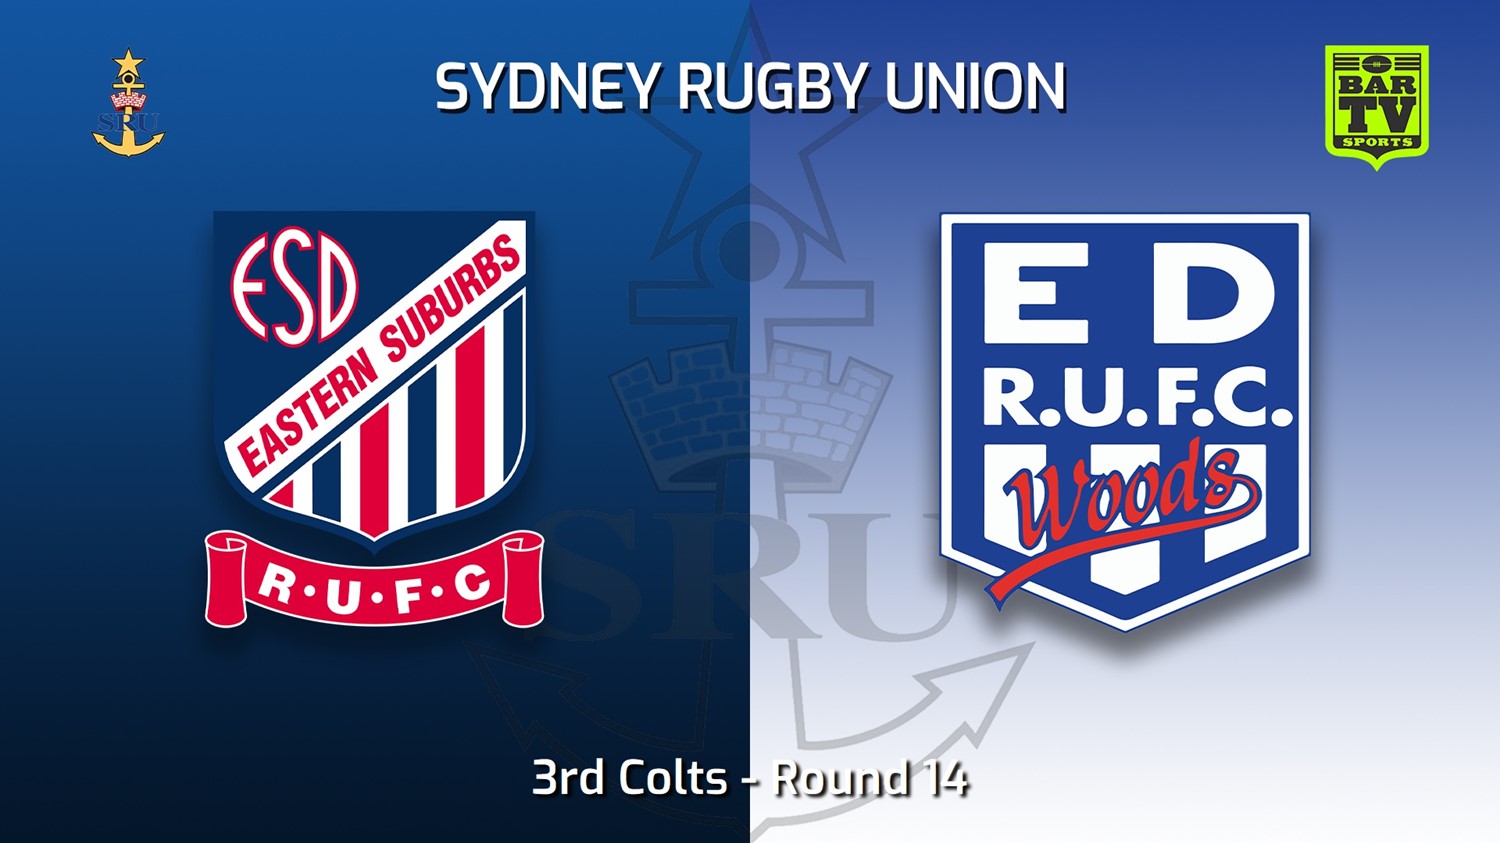 220710-Sydney Rugby Union Round 14 - 3rd Colts - Eastern Suburbs Sydney v Eastwood Slate Image